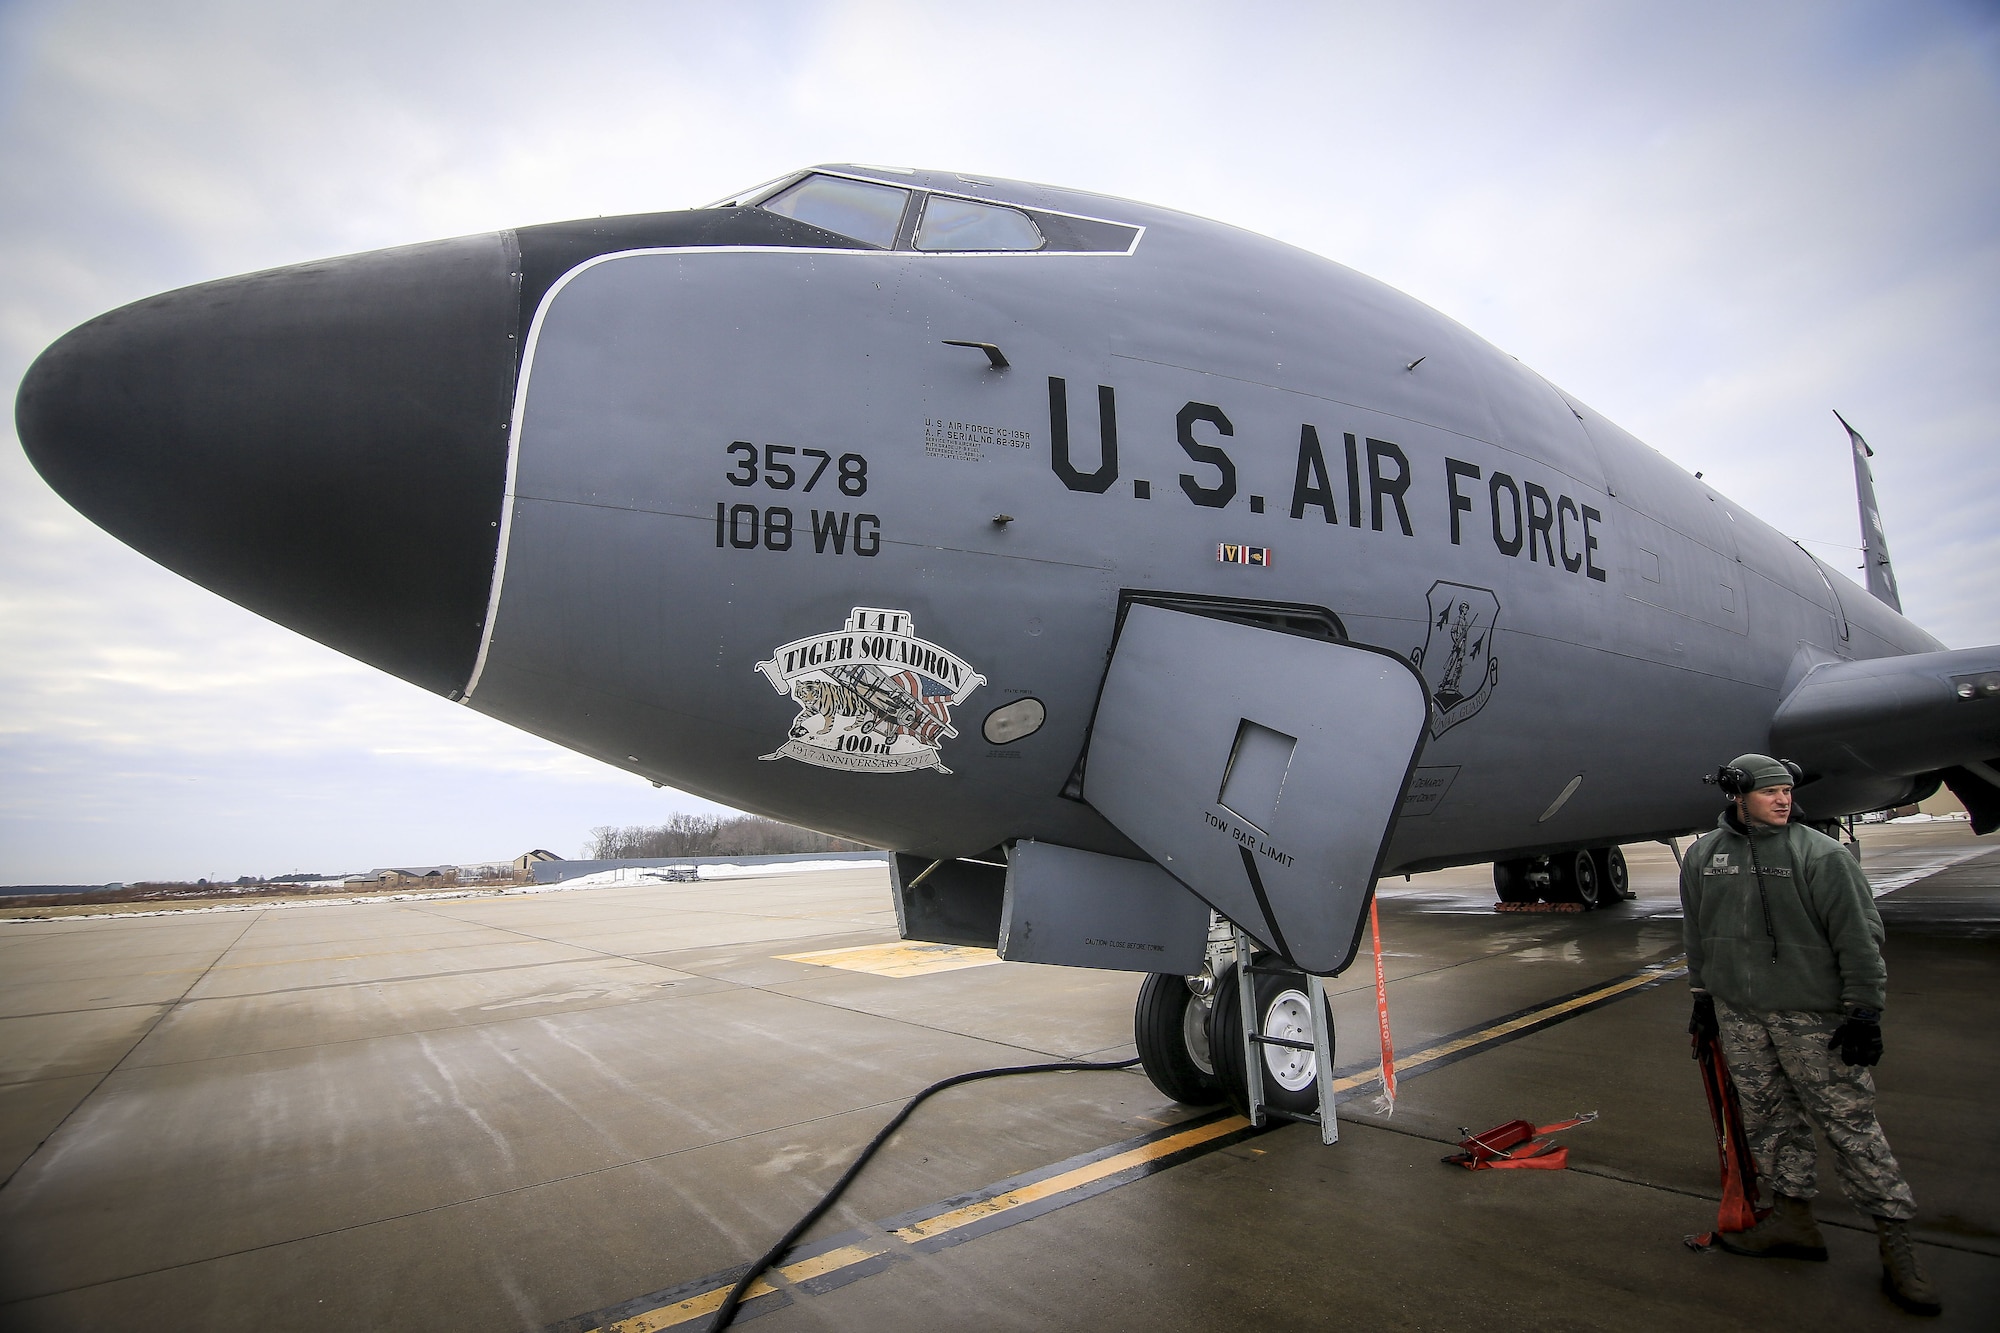 New Jersey Air National Guard Staff Sgt. Robert Cento pulls red tags during pre-flight checks on a 108th Wing KC-135R Stratotanker prior to a training flight on Joint Base McGuire-Dix-Lakehurst, N.J., Jan. 11, 2018. (U.S. Air National Guard photo by Master Sgt. Matt Hecht)